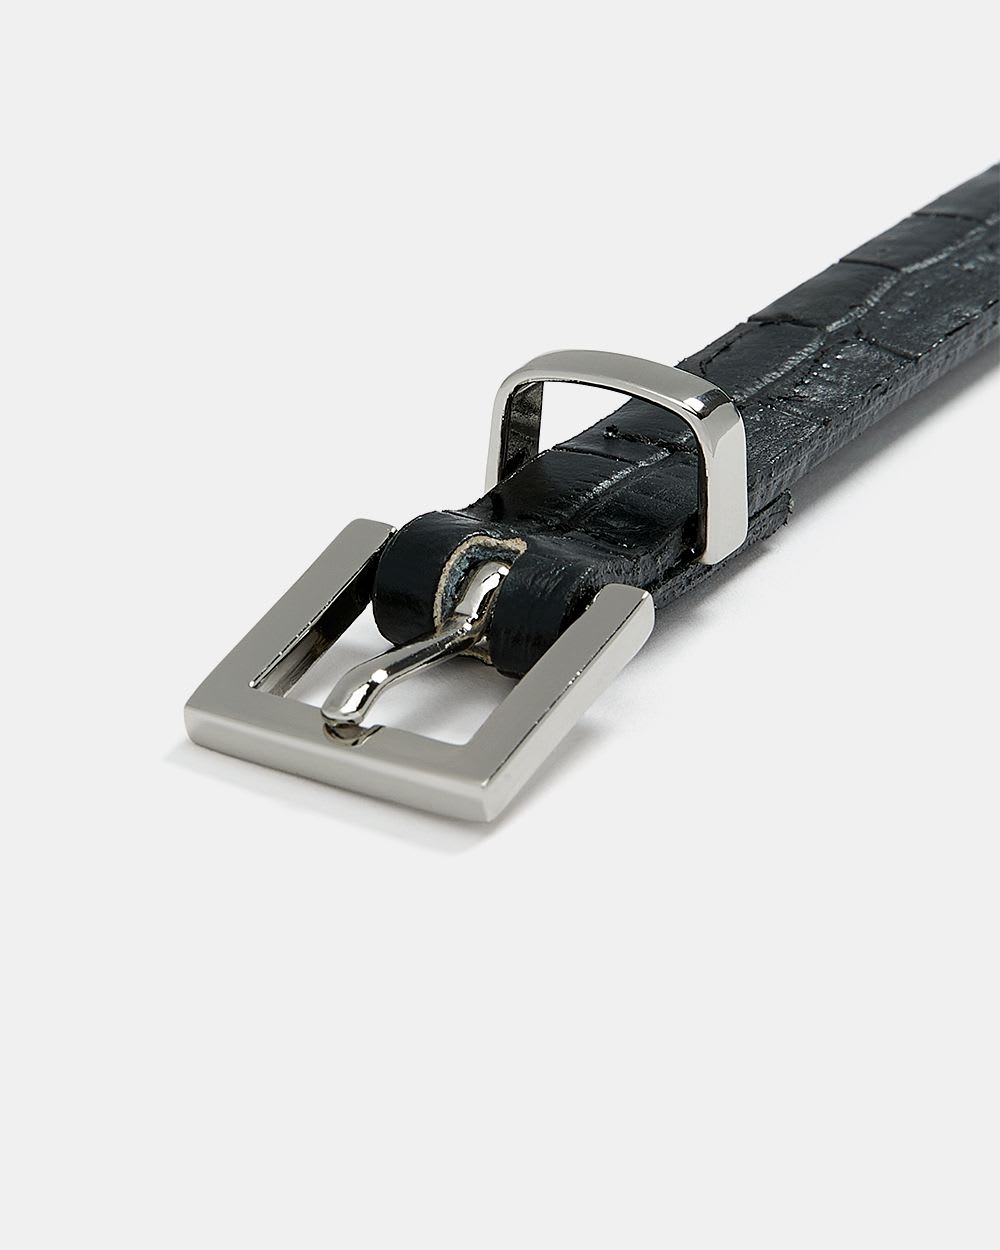 Skinny Croco Leather Belt with Square Buckle